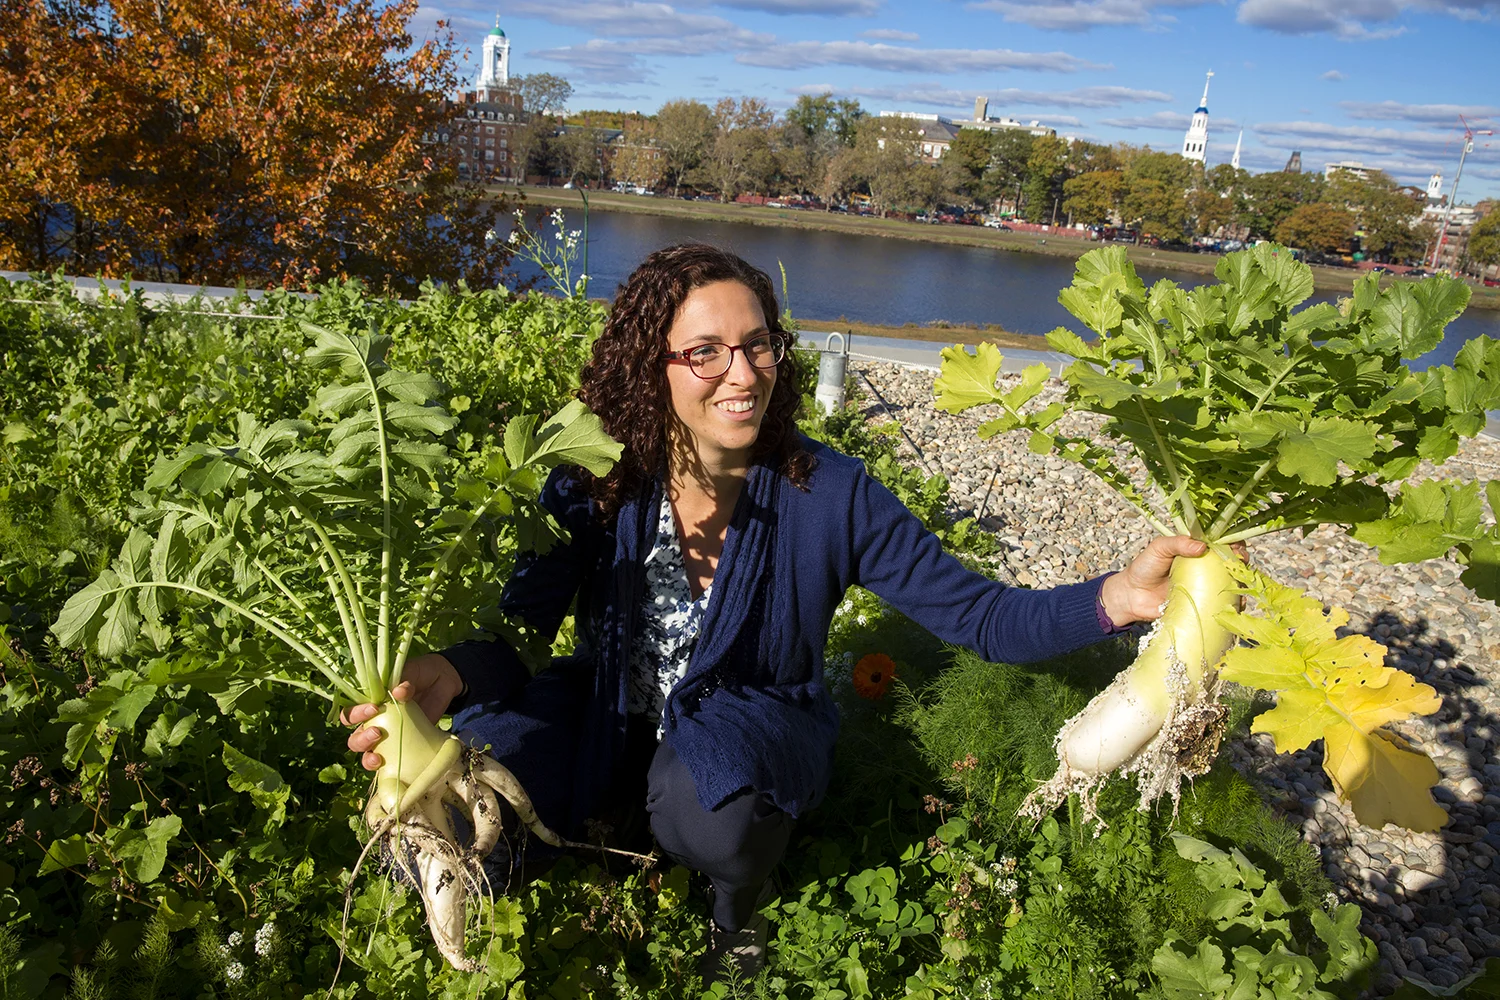 Woman harvests Daikon radishes on one of the many green roofs on campus with Charles river and Cambridge in the background